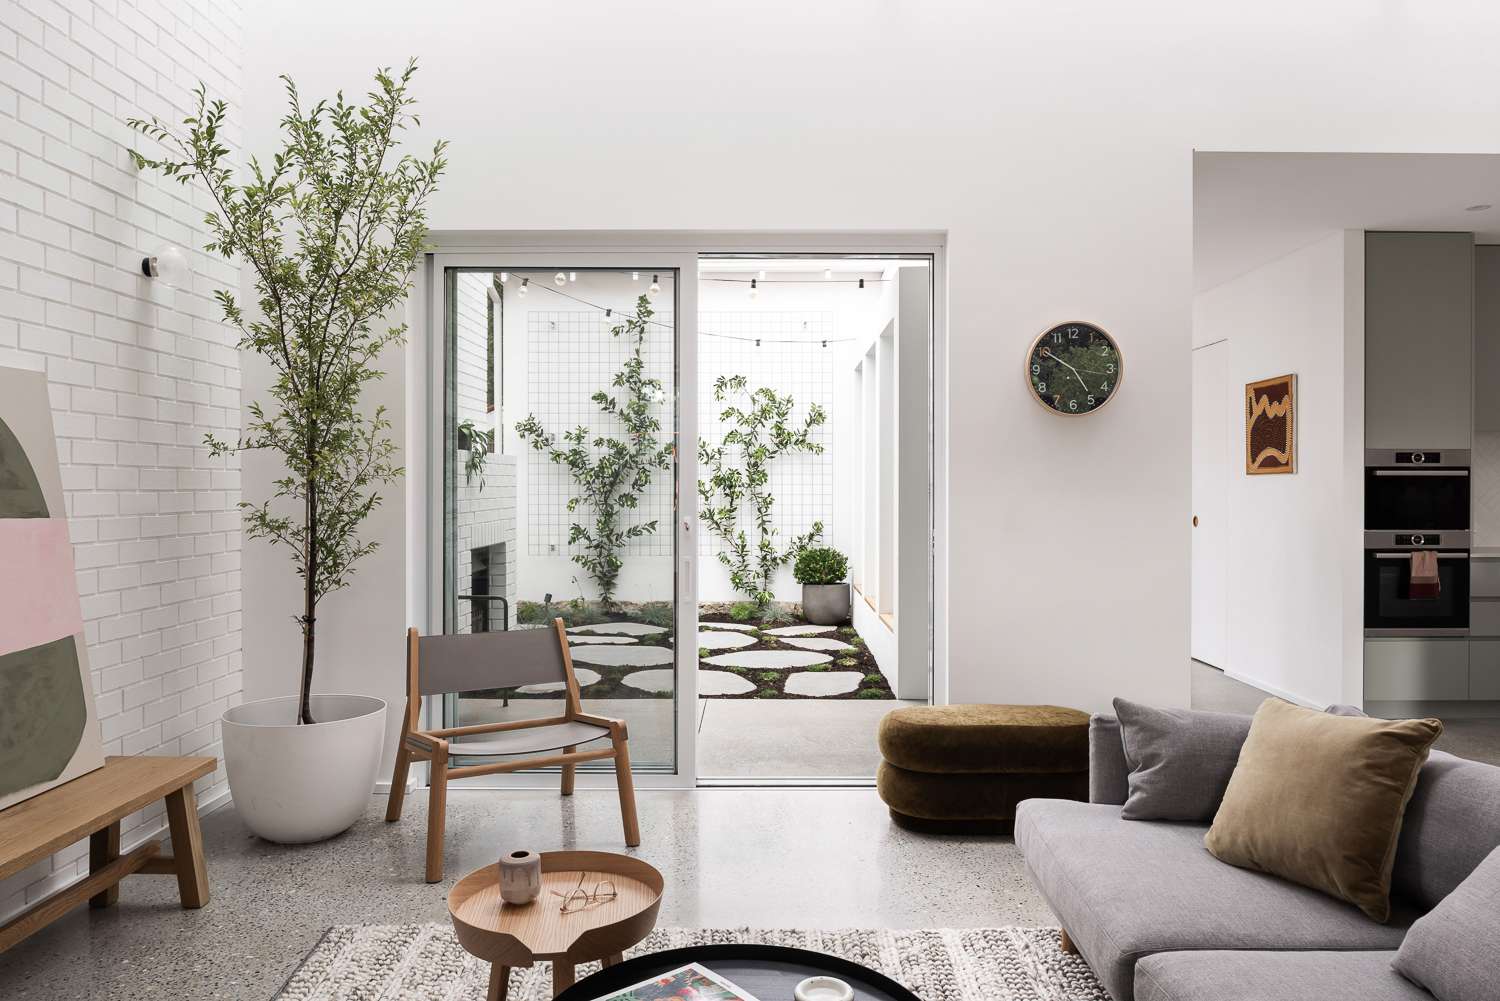 The Third by Dalecki Design showing living space looking out to garden courtyard